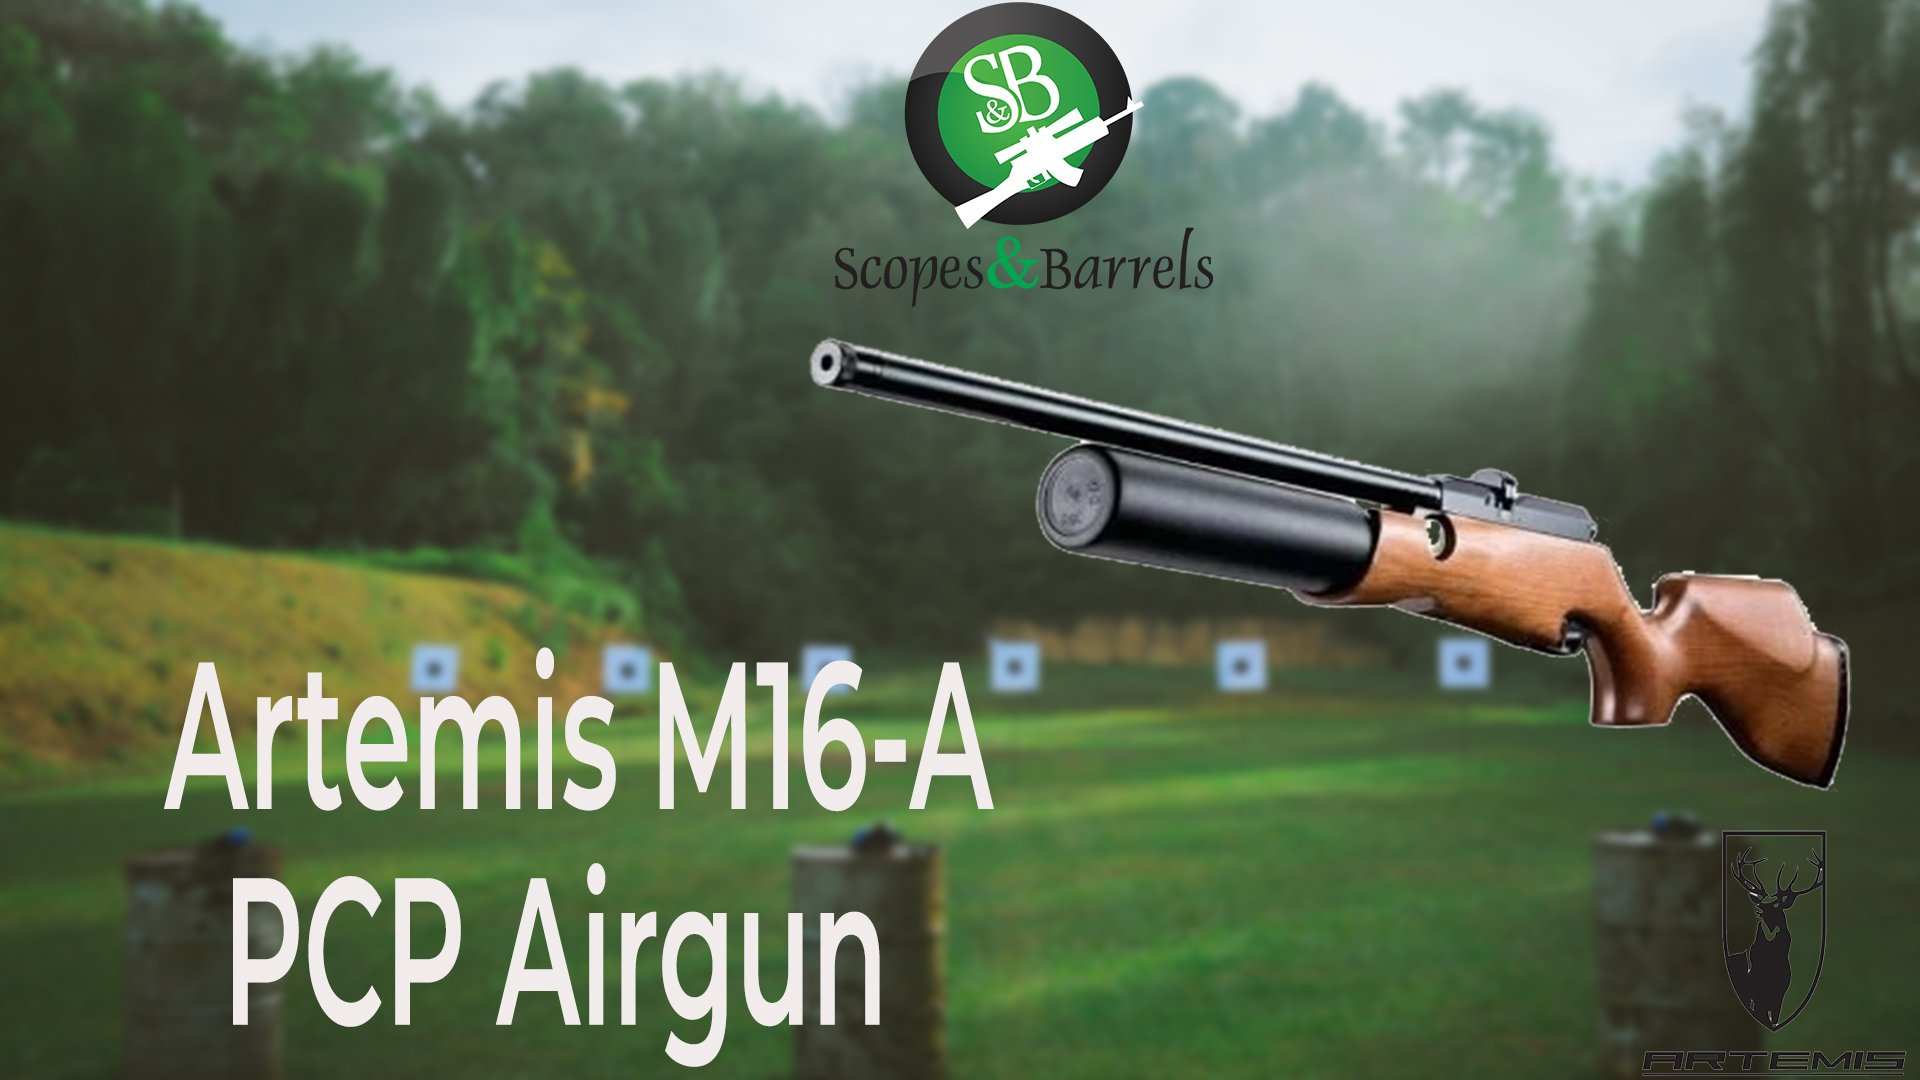 Artemis M16-A PCP Airgun. A Great option for demanding Snipers. - Scopes and Barrels